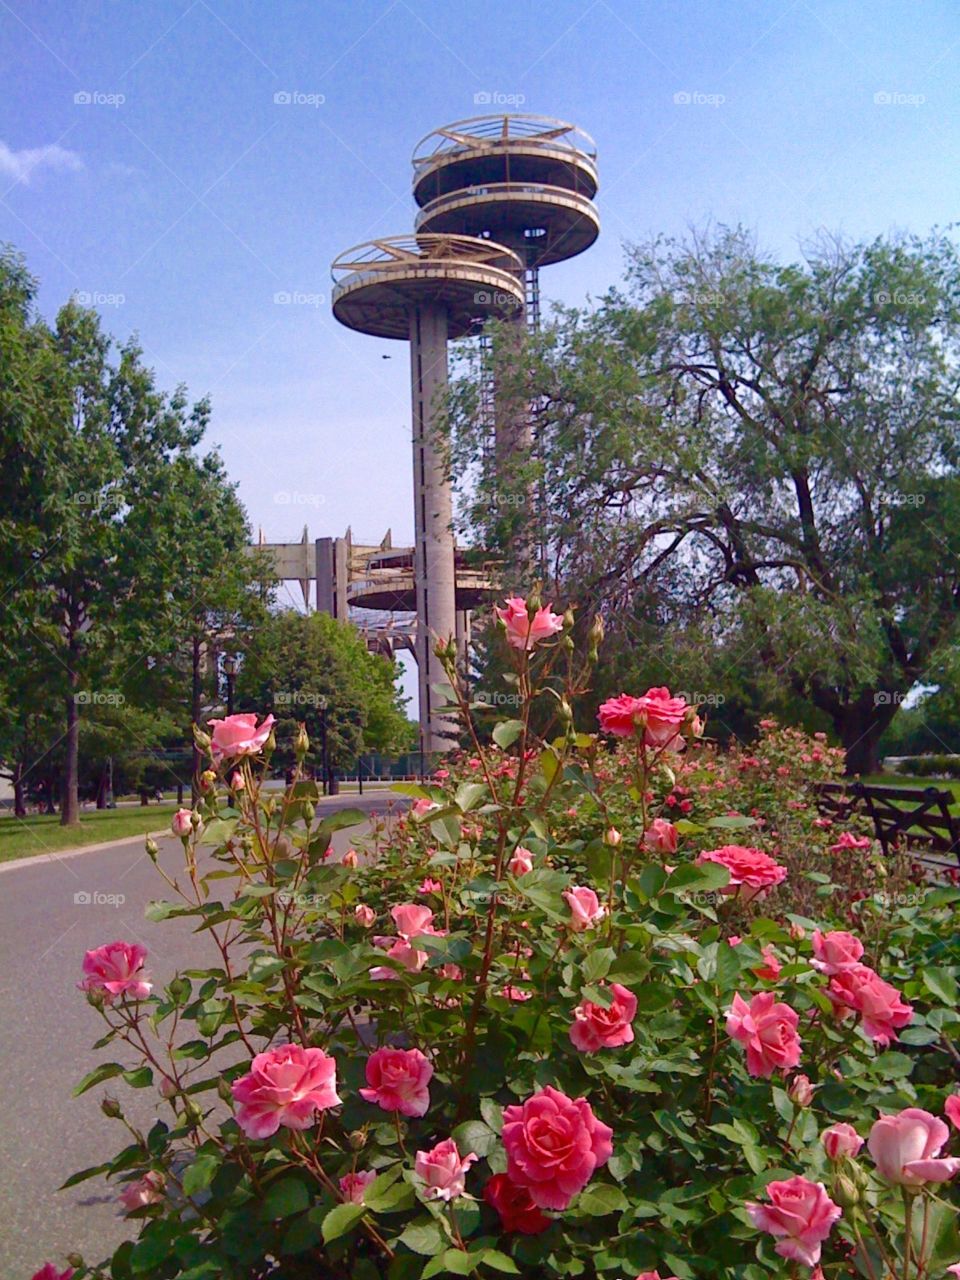 New York State Pavilion. Roses bloom at the New York State Pavilion from the 1964 Worlds Fair in Flushing Meadows, Queens.